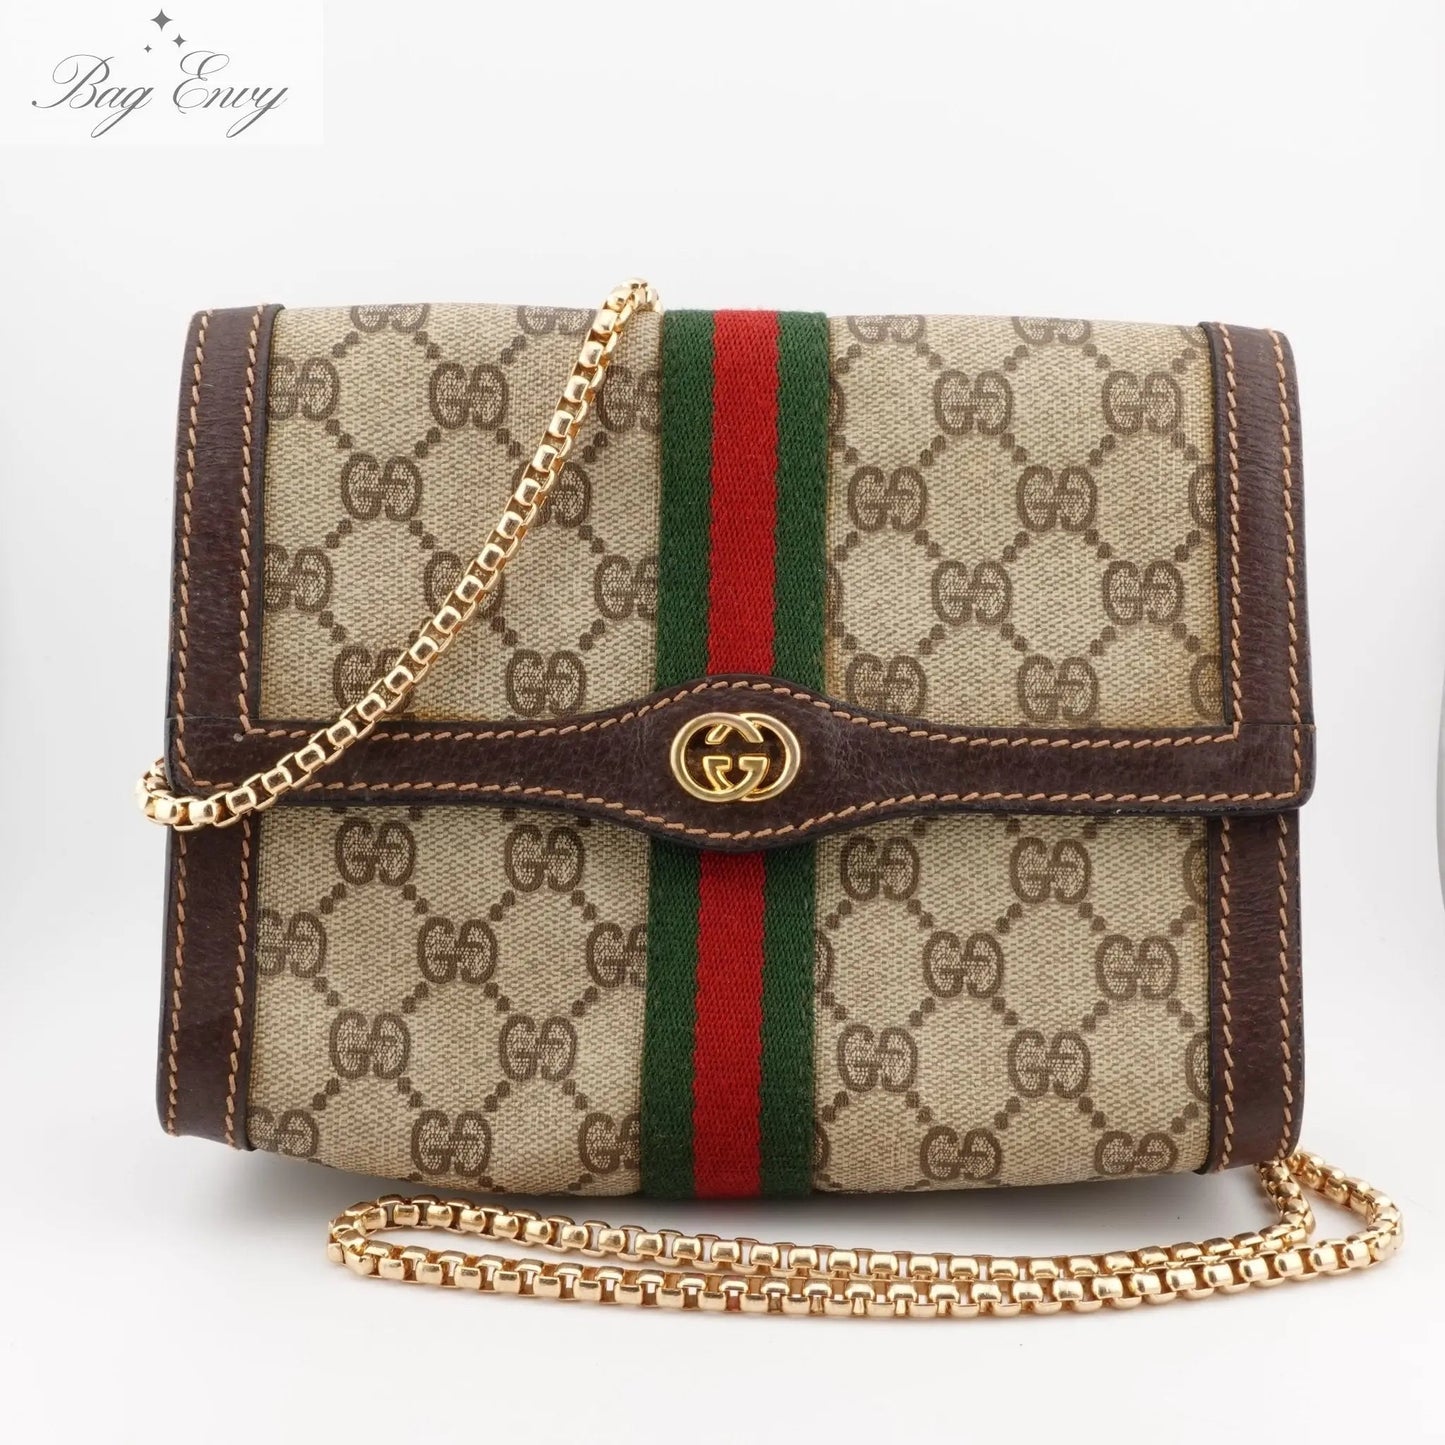 GUCCI Small Ophidia Clutch with Chain - Bag Envy